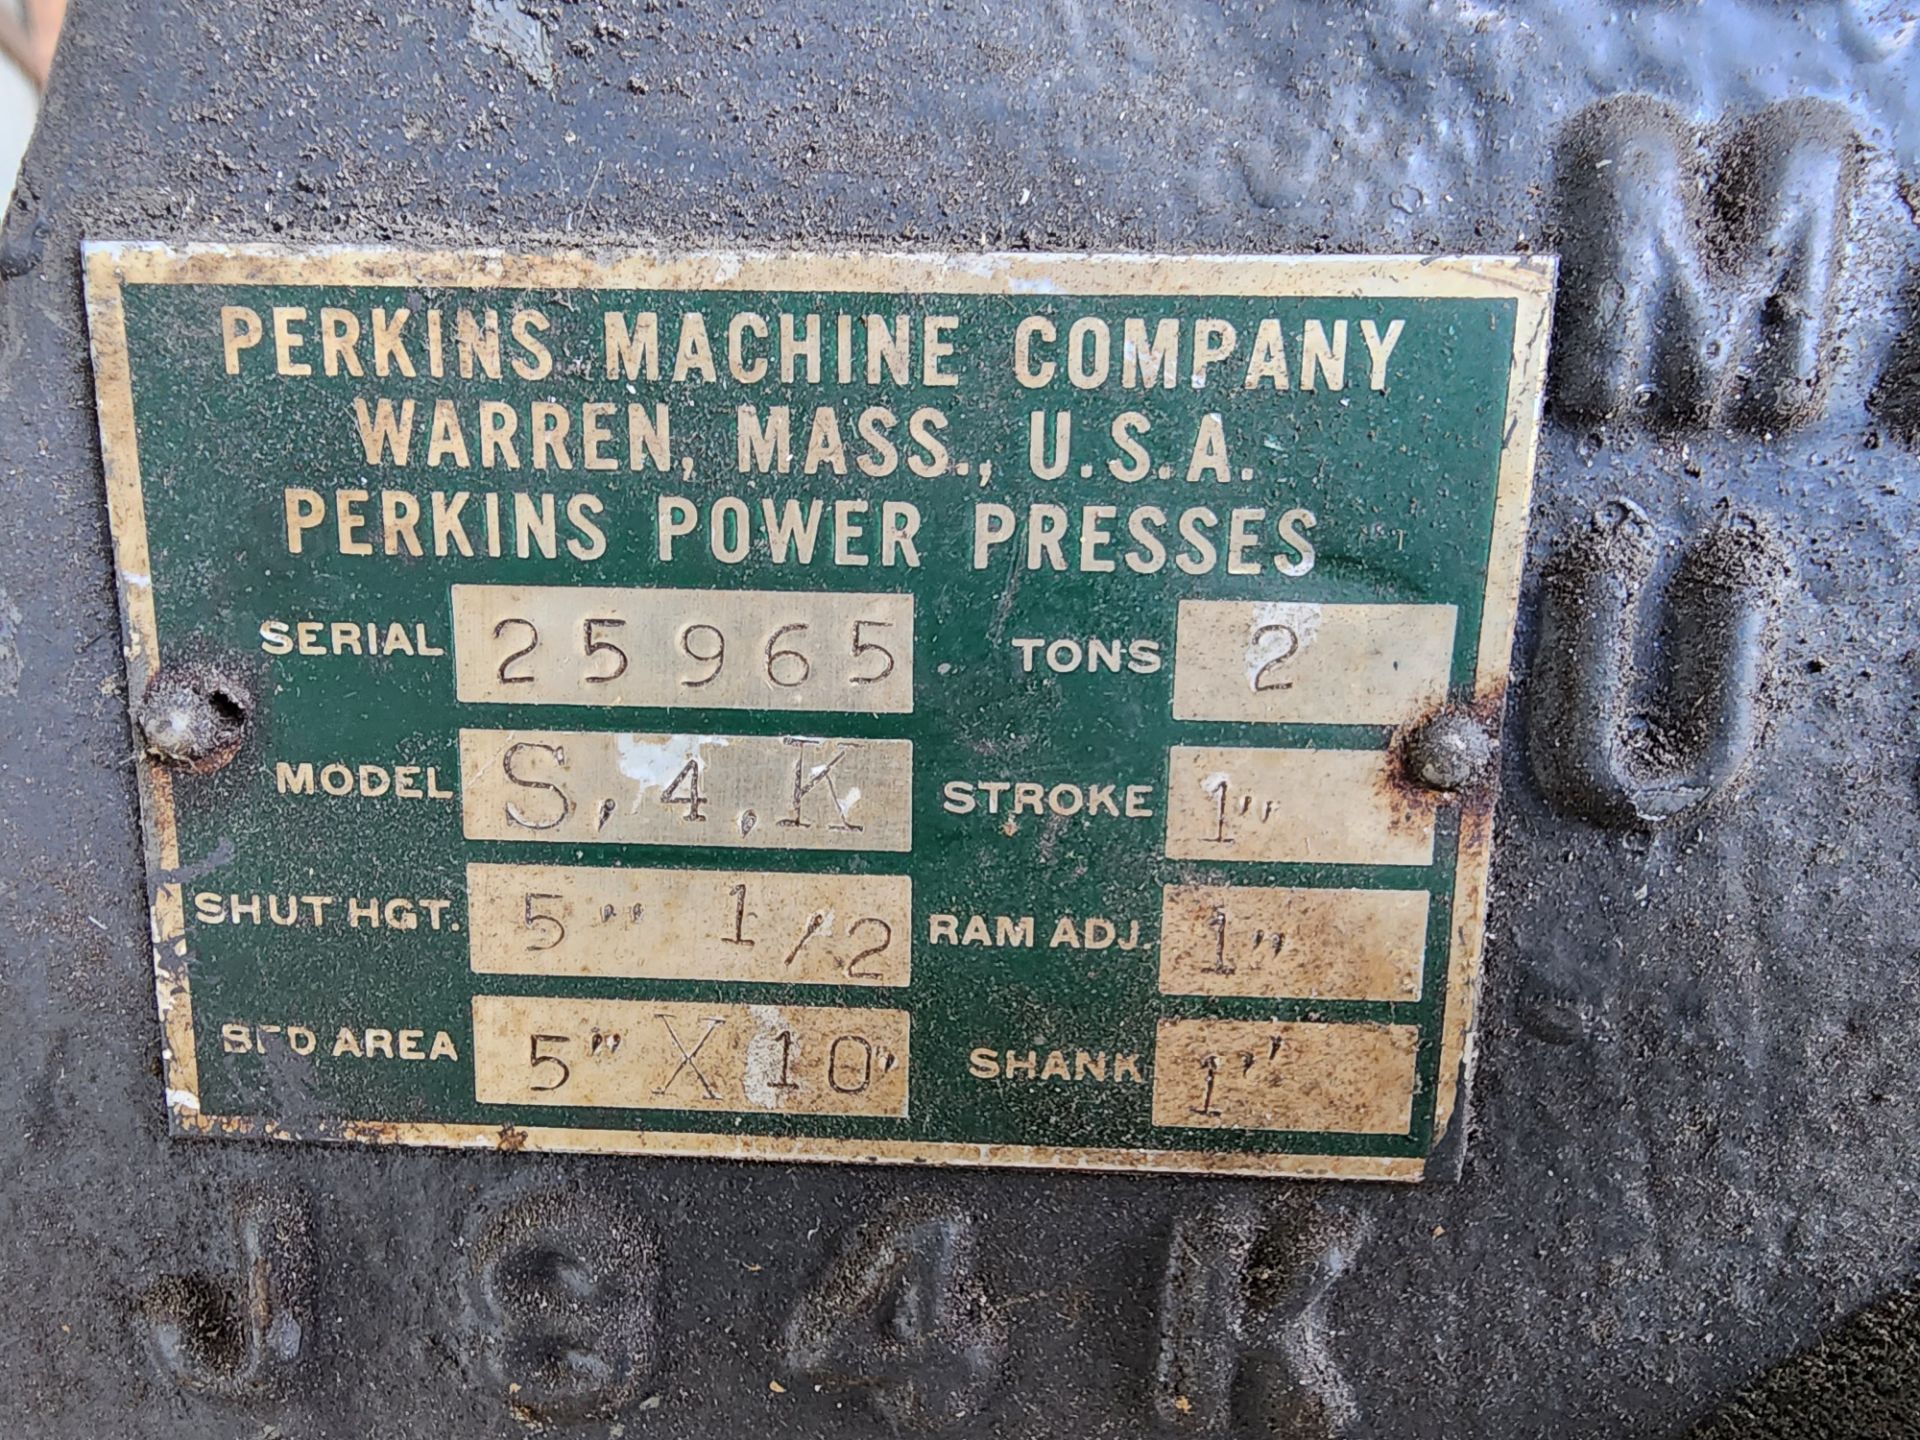 Perkins Model S4K Electric Power Press for Socket Punching (Fluorescent Bulbs) - Image 3 of 3